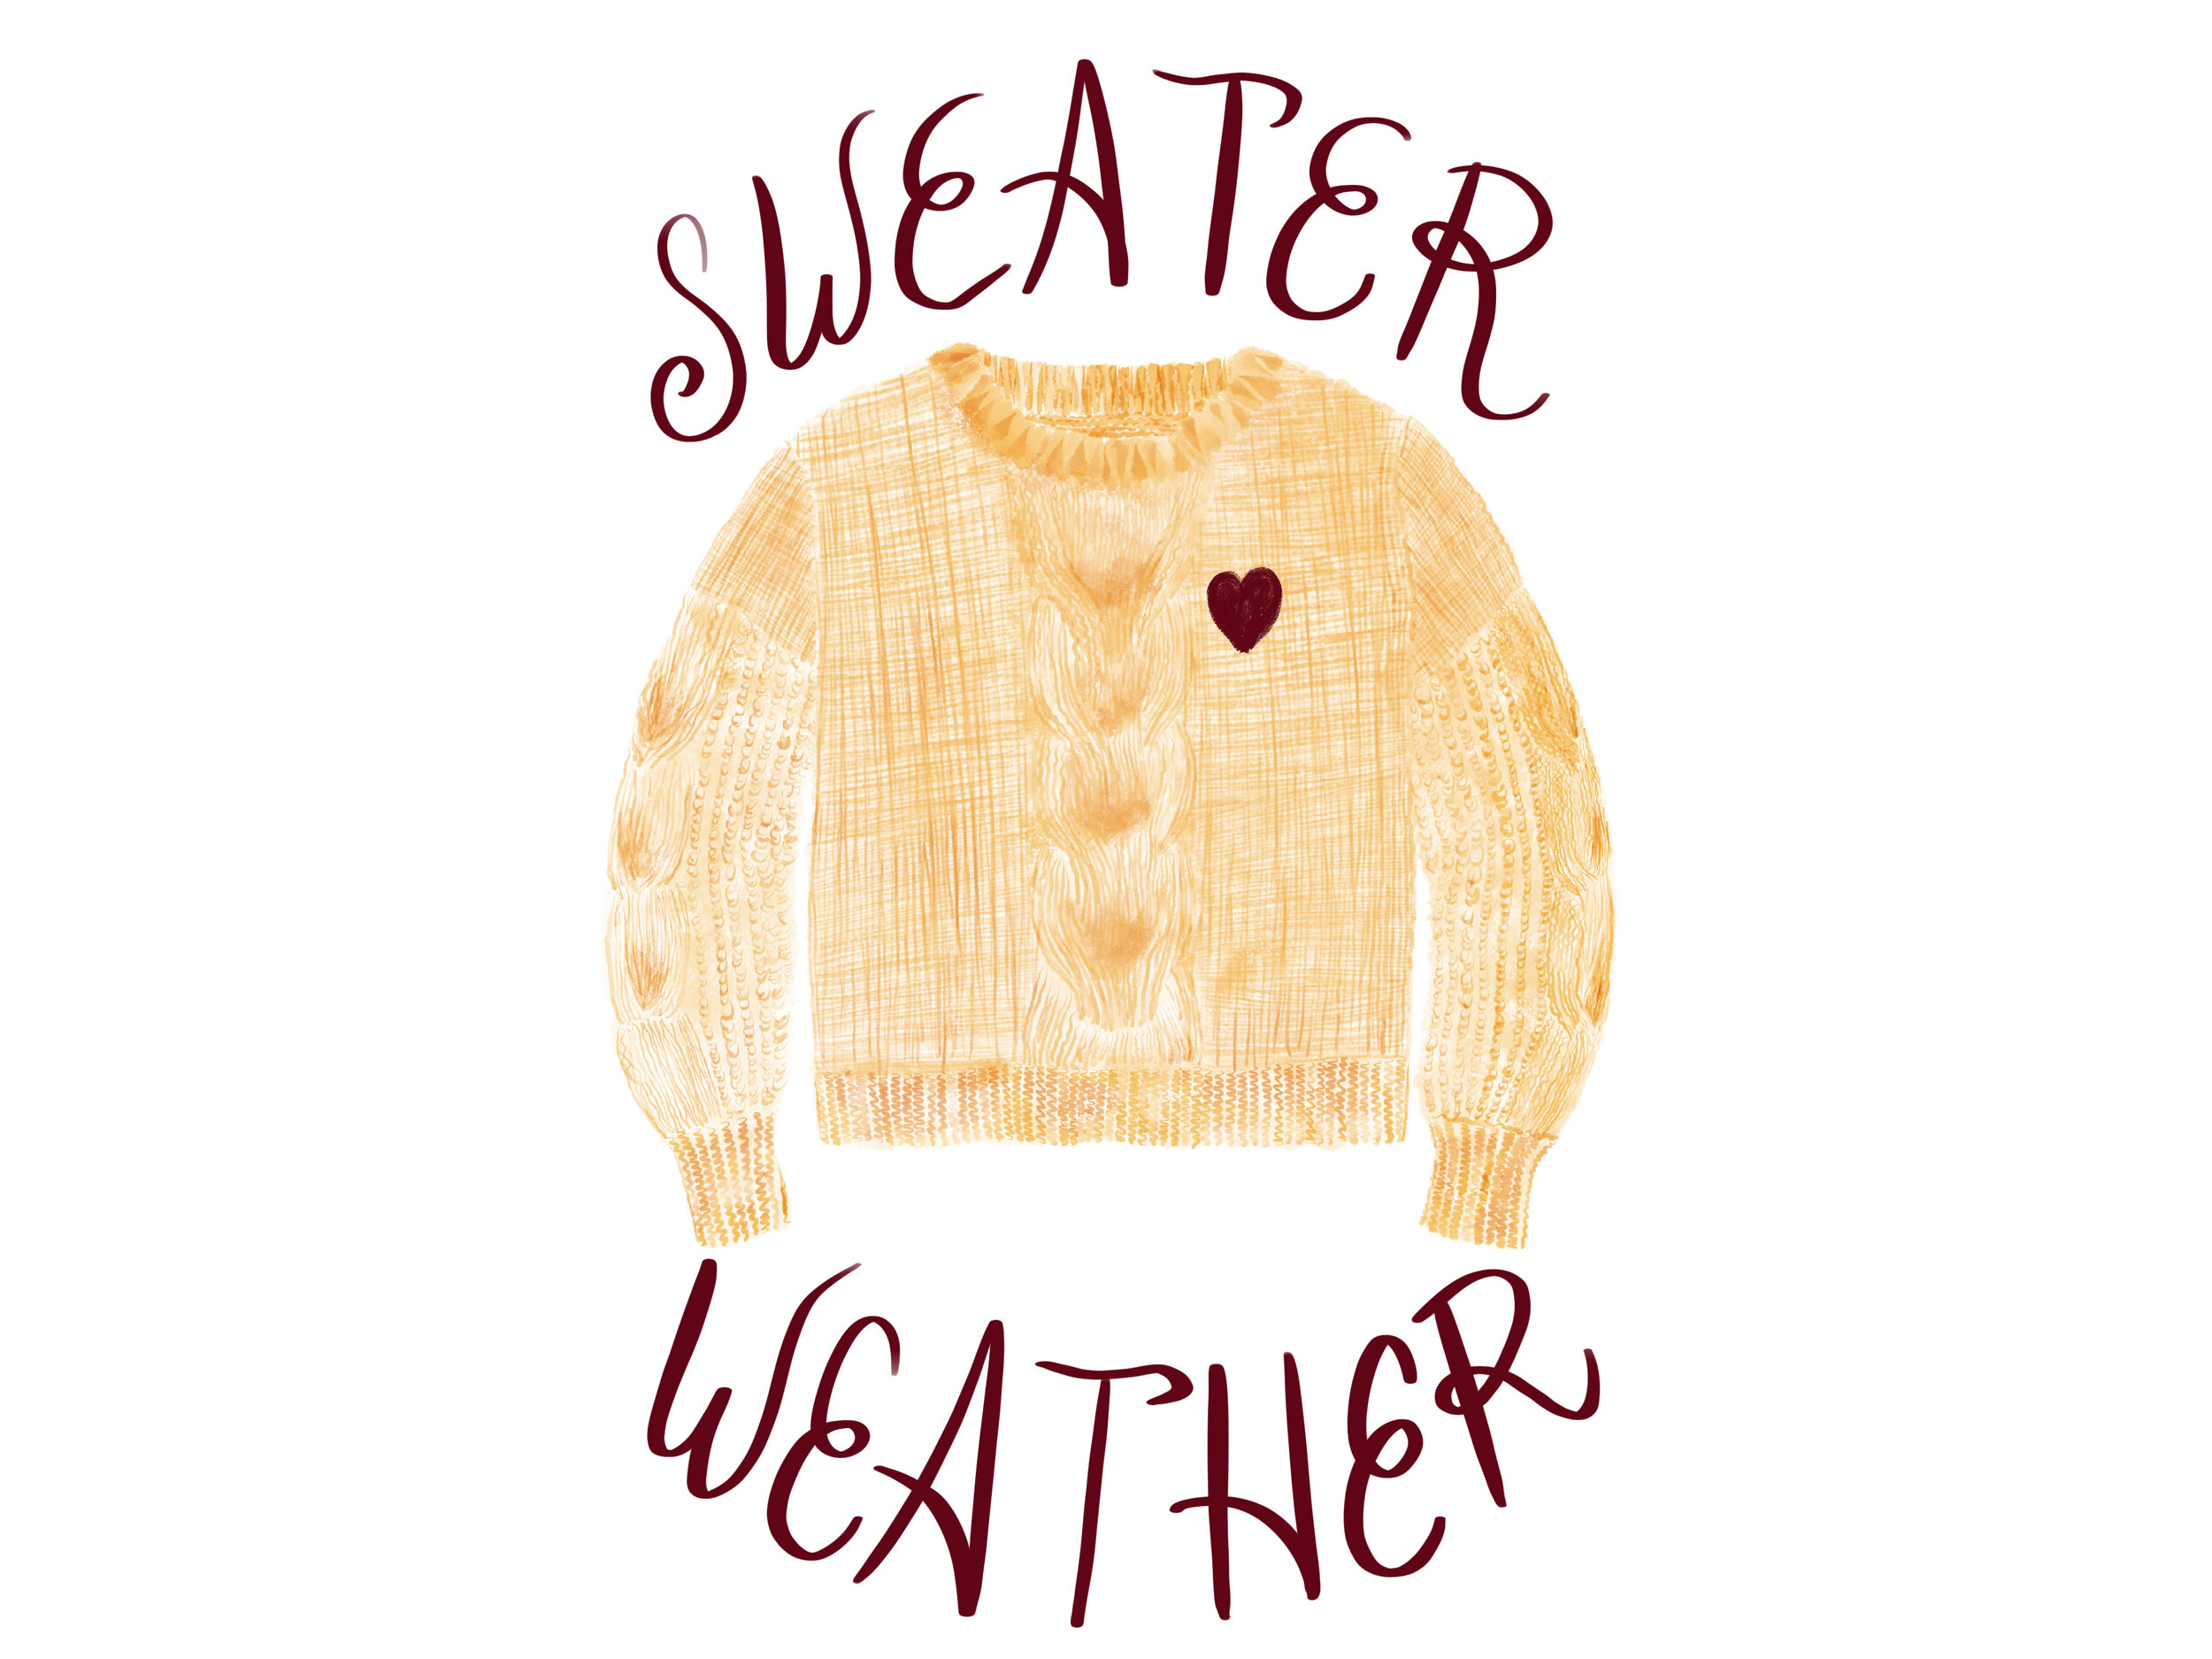 Sweater Weather